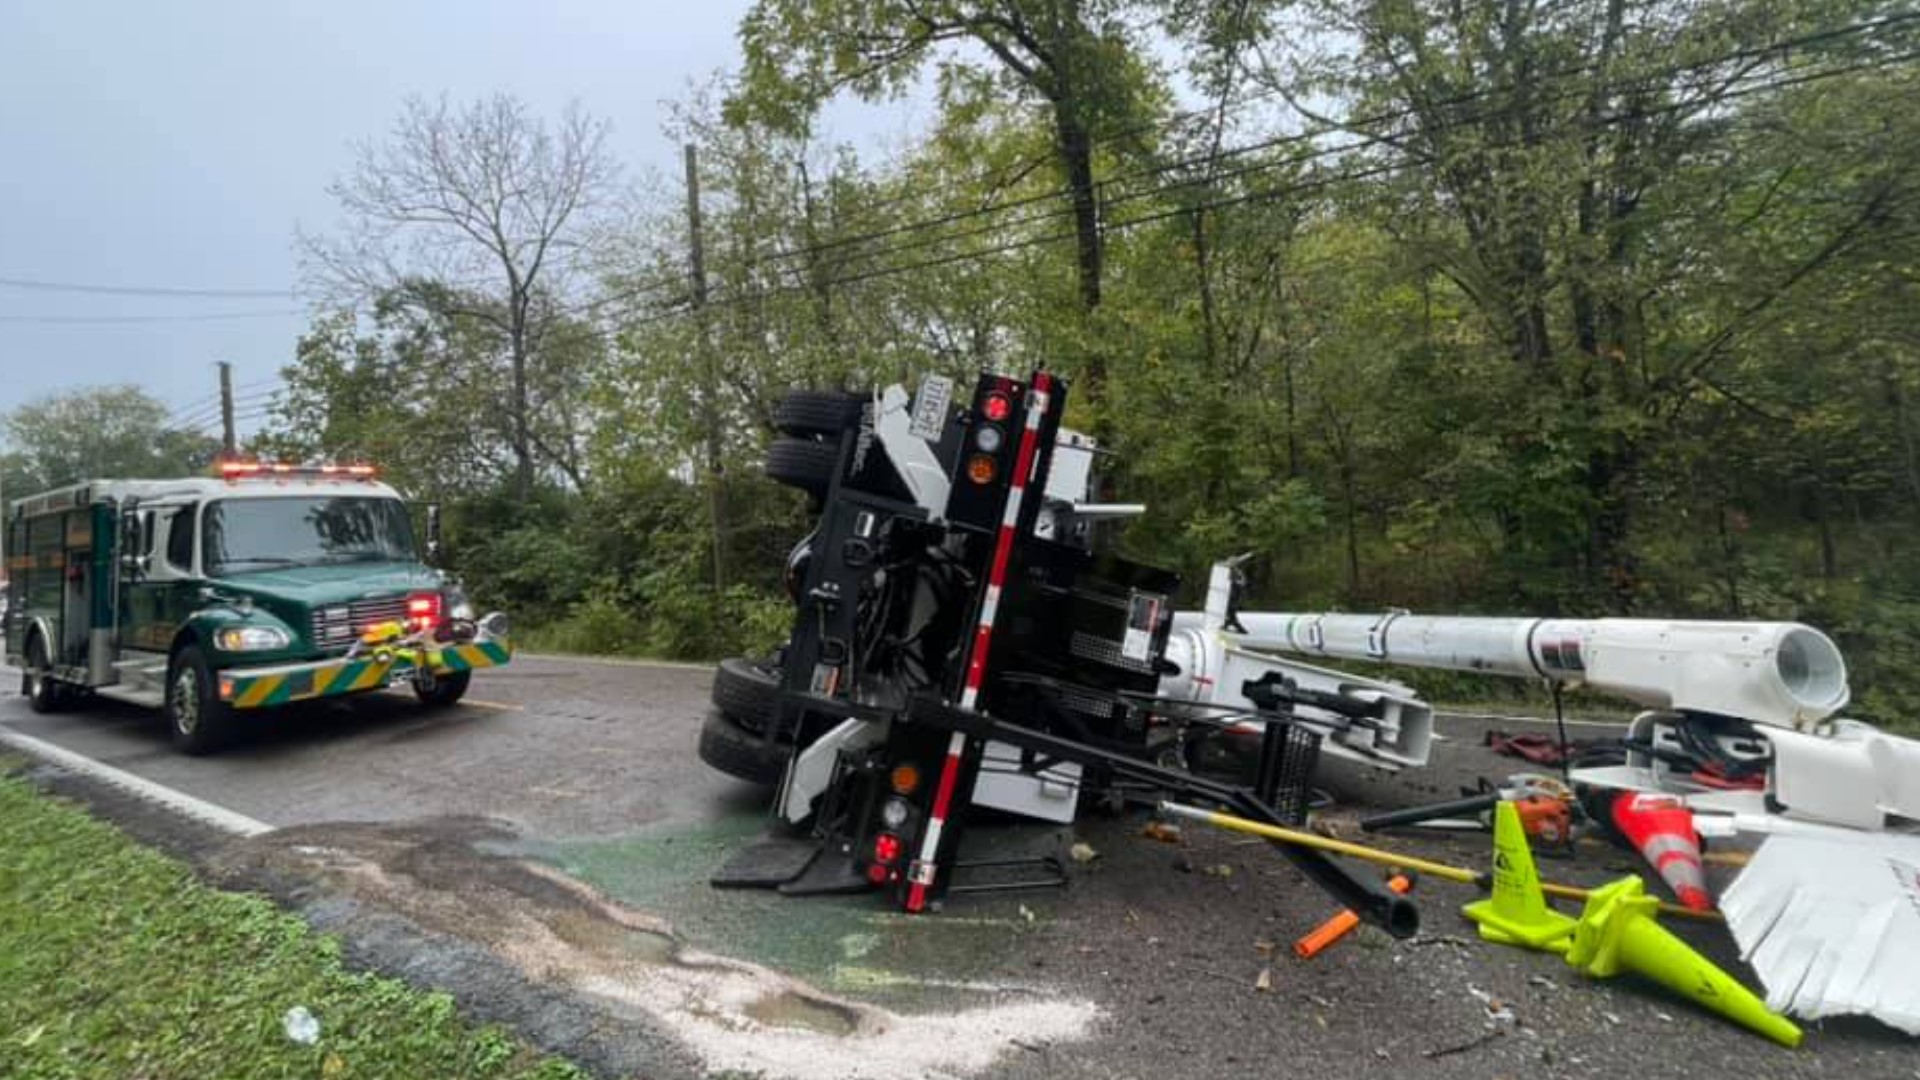 Knox County Rescue said one person is in the hospital after a utility truck crashed on Millertown Pike Tuesday afternoon.